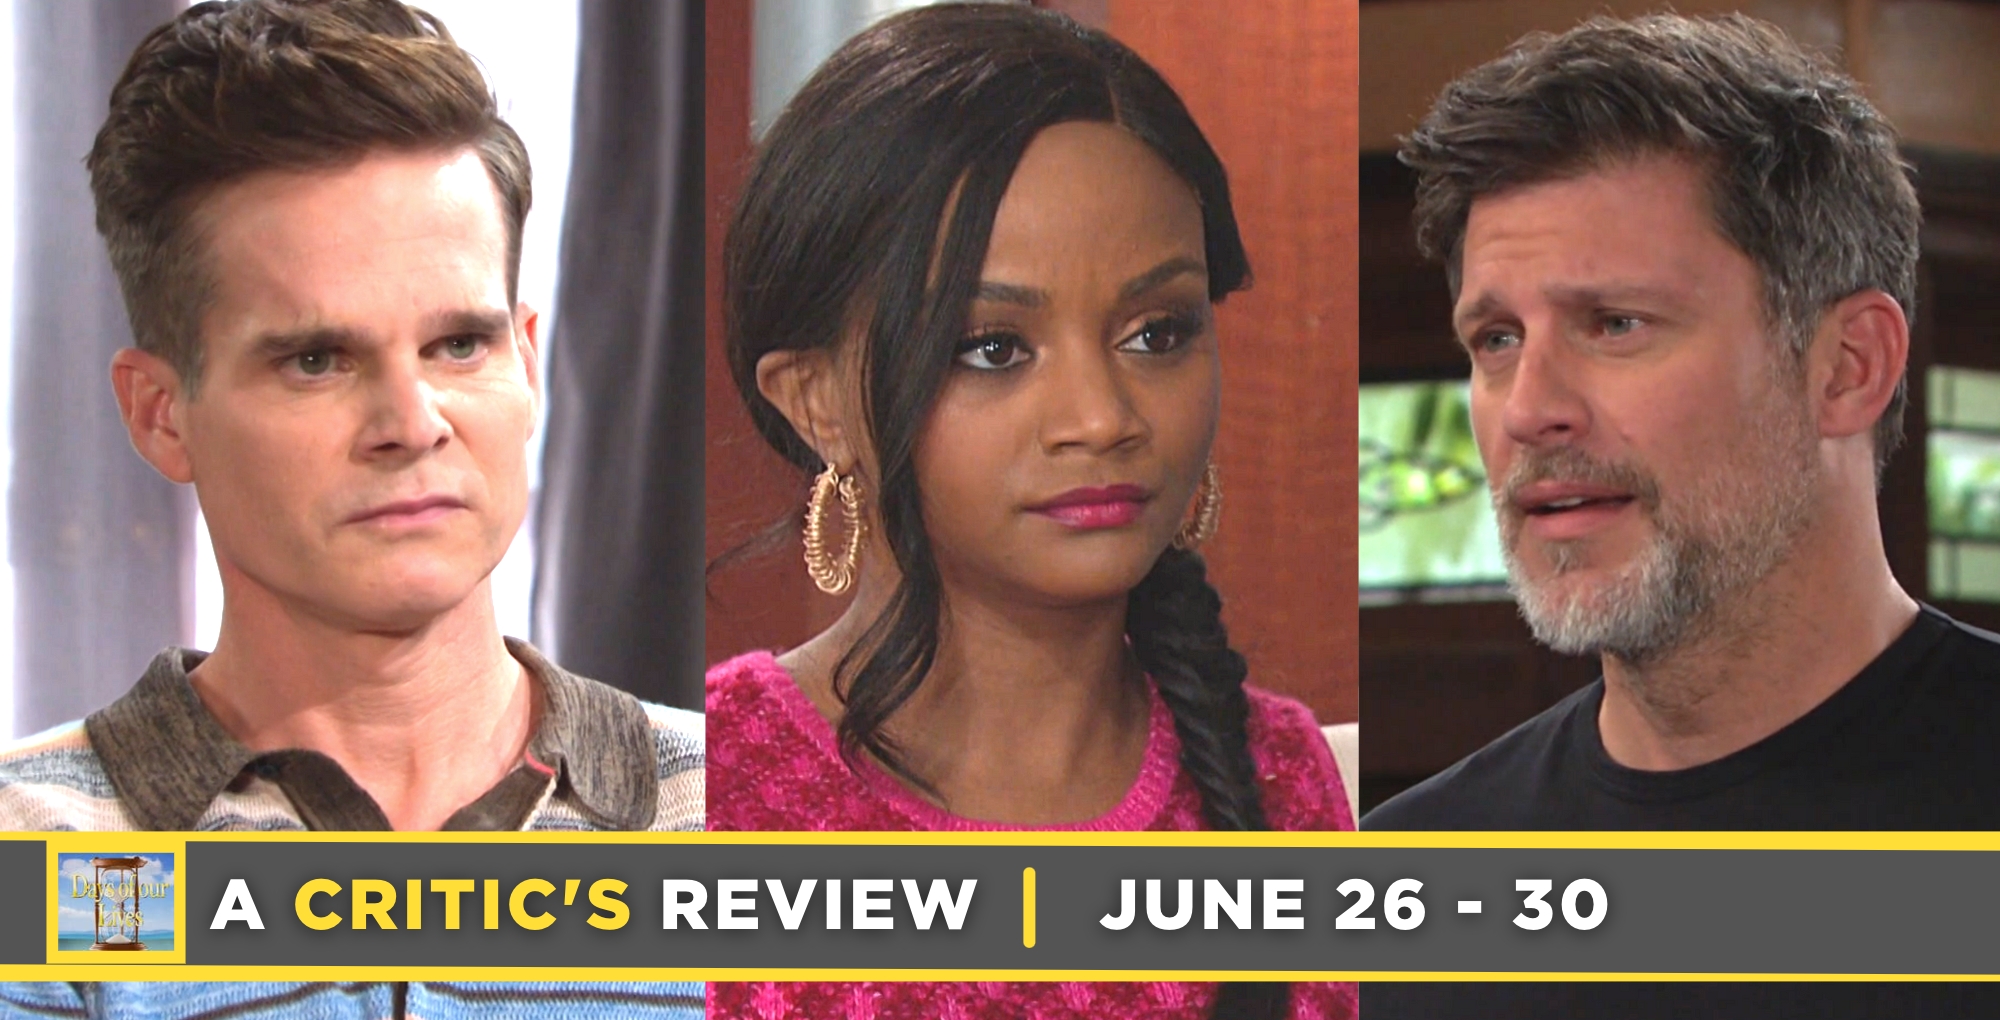 days of our lives critic's review for june 26 – june 30, 2023, leo, chanel, eric.